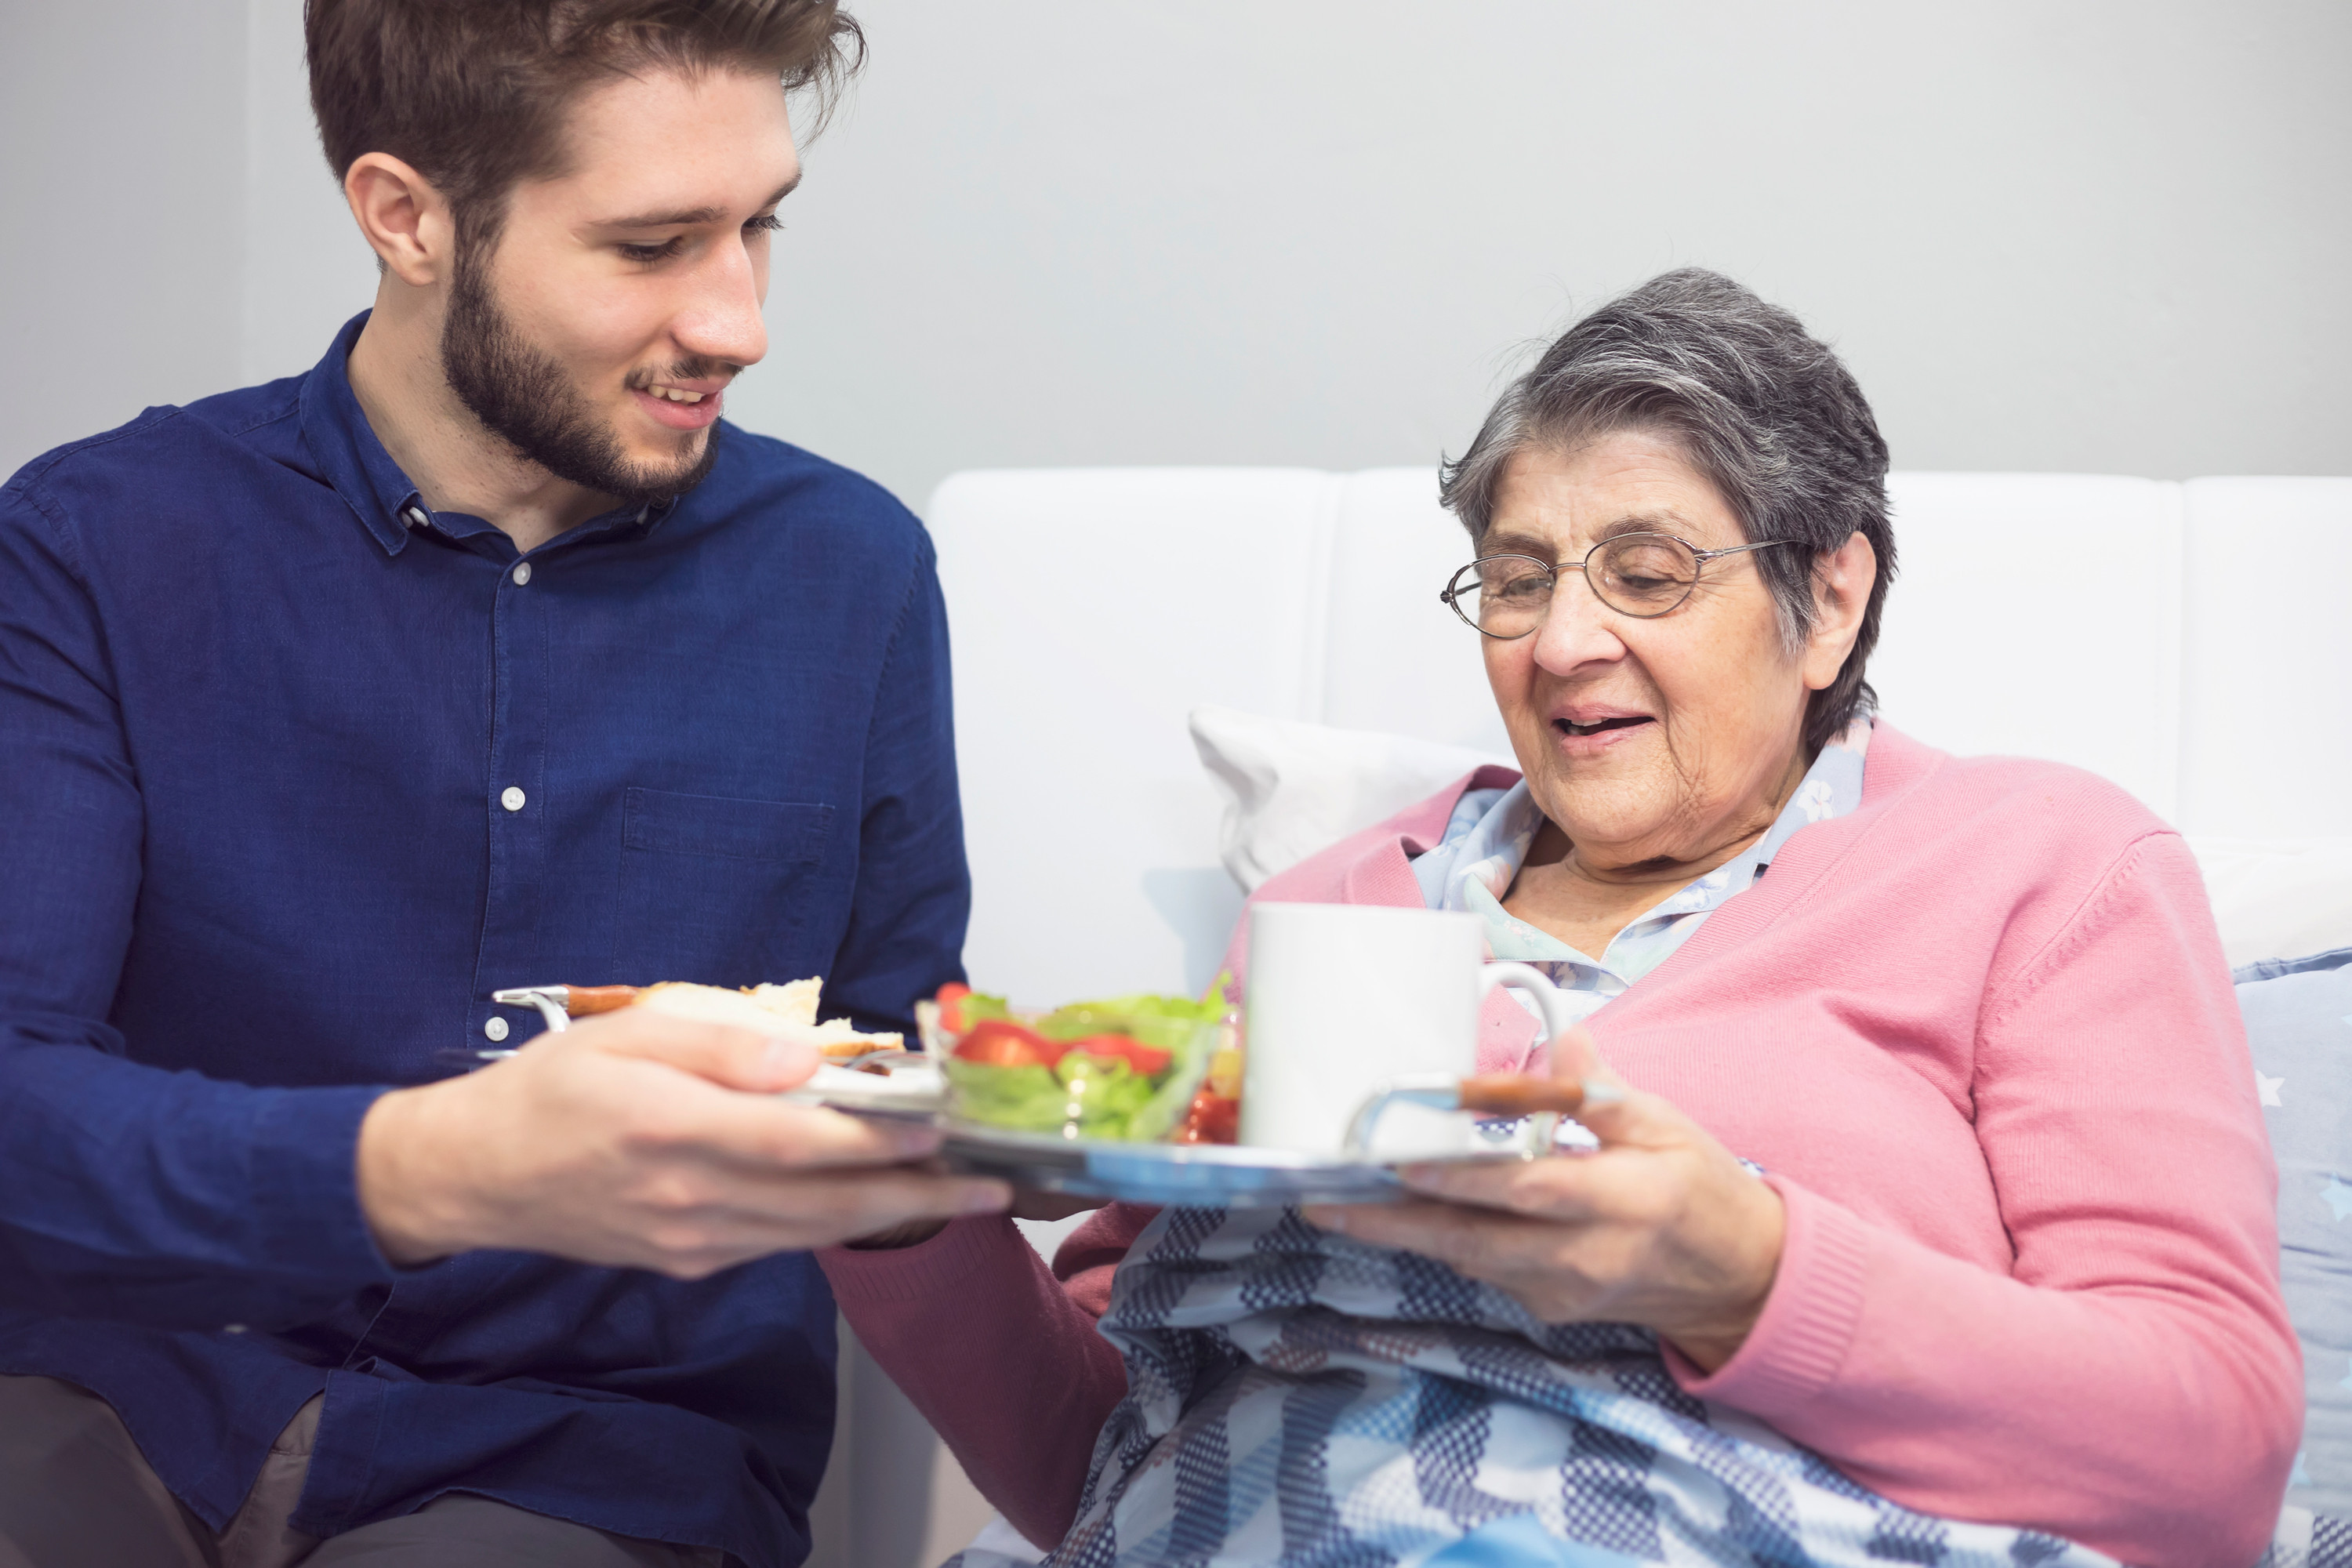 Man giving patient a lunch tray